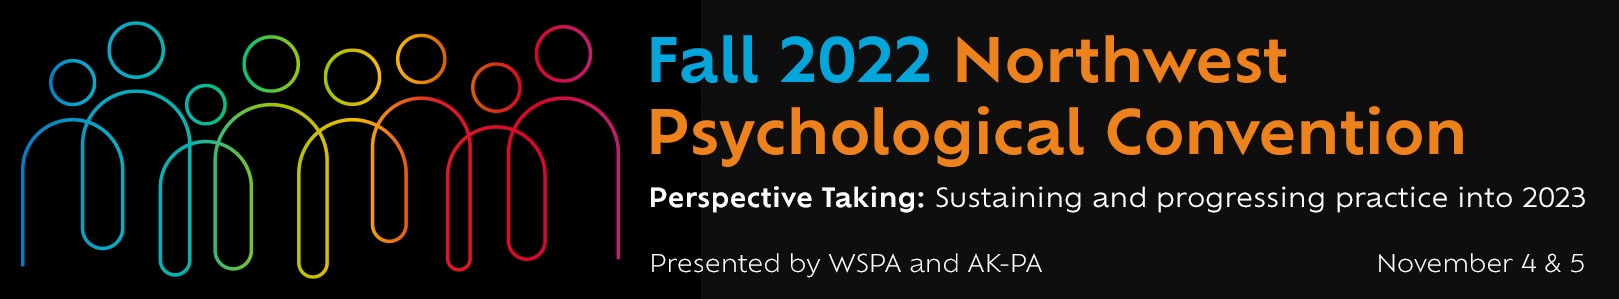 Join us at our Fall 2022 Northwest Psychological Convention